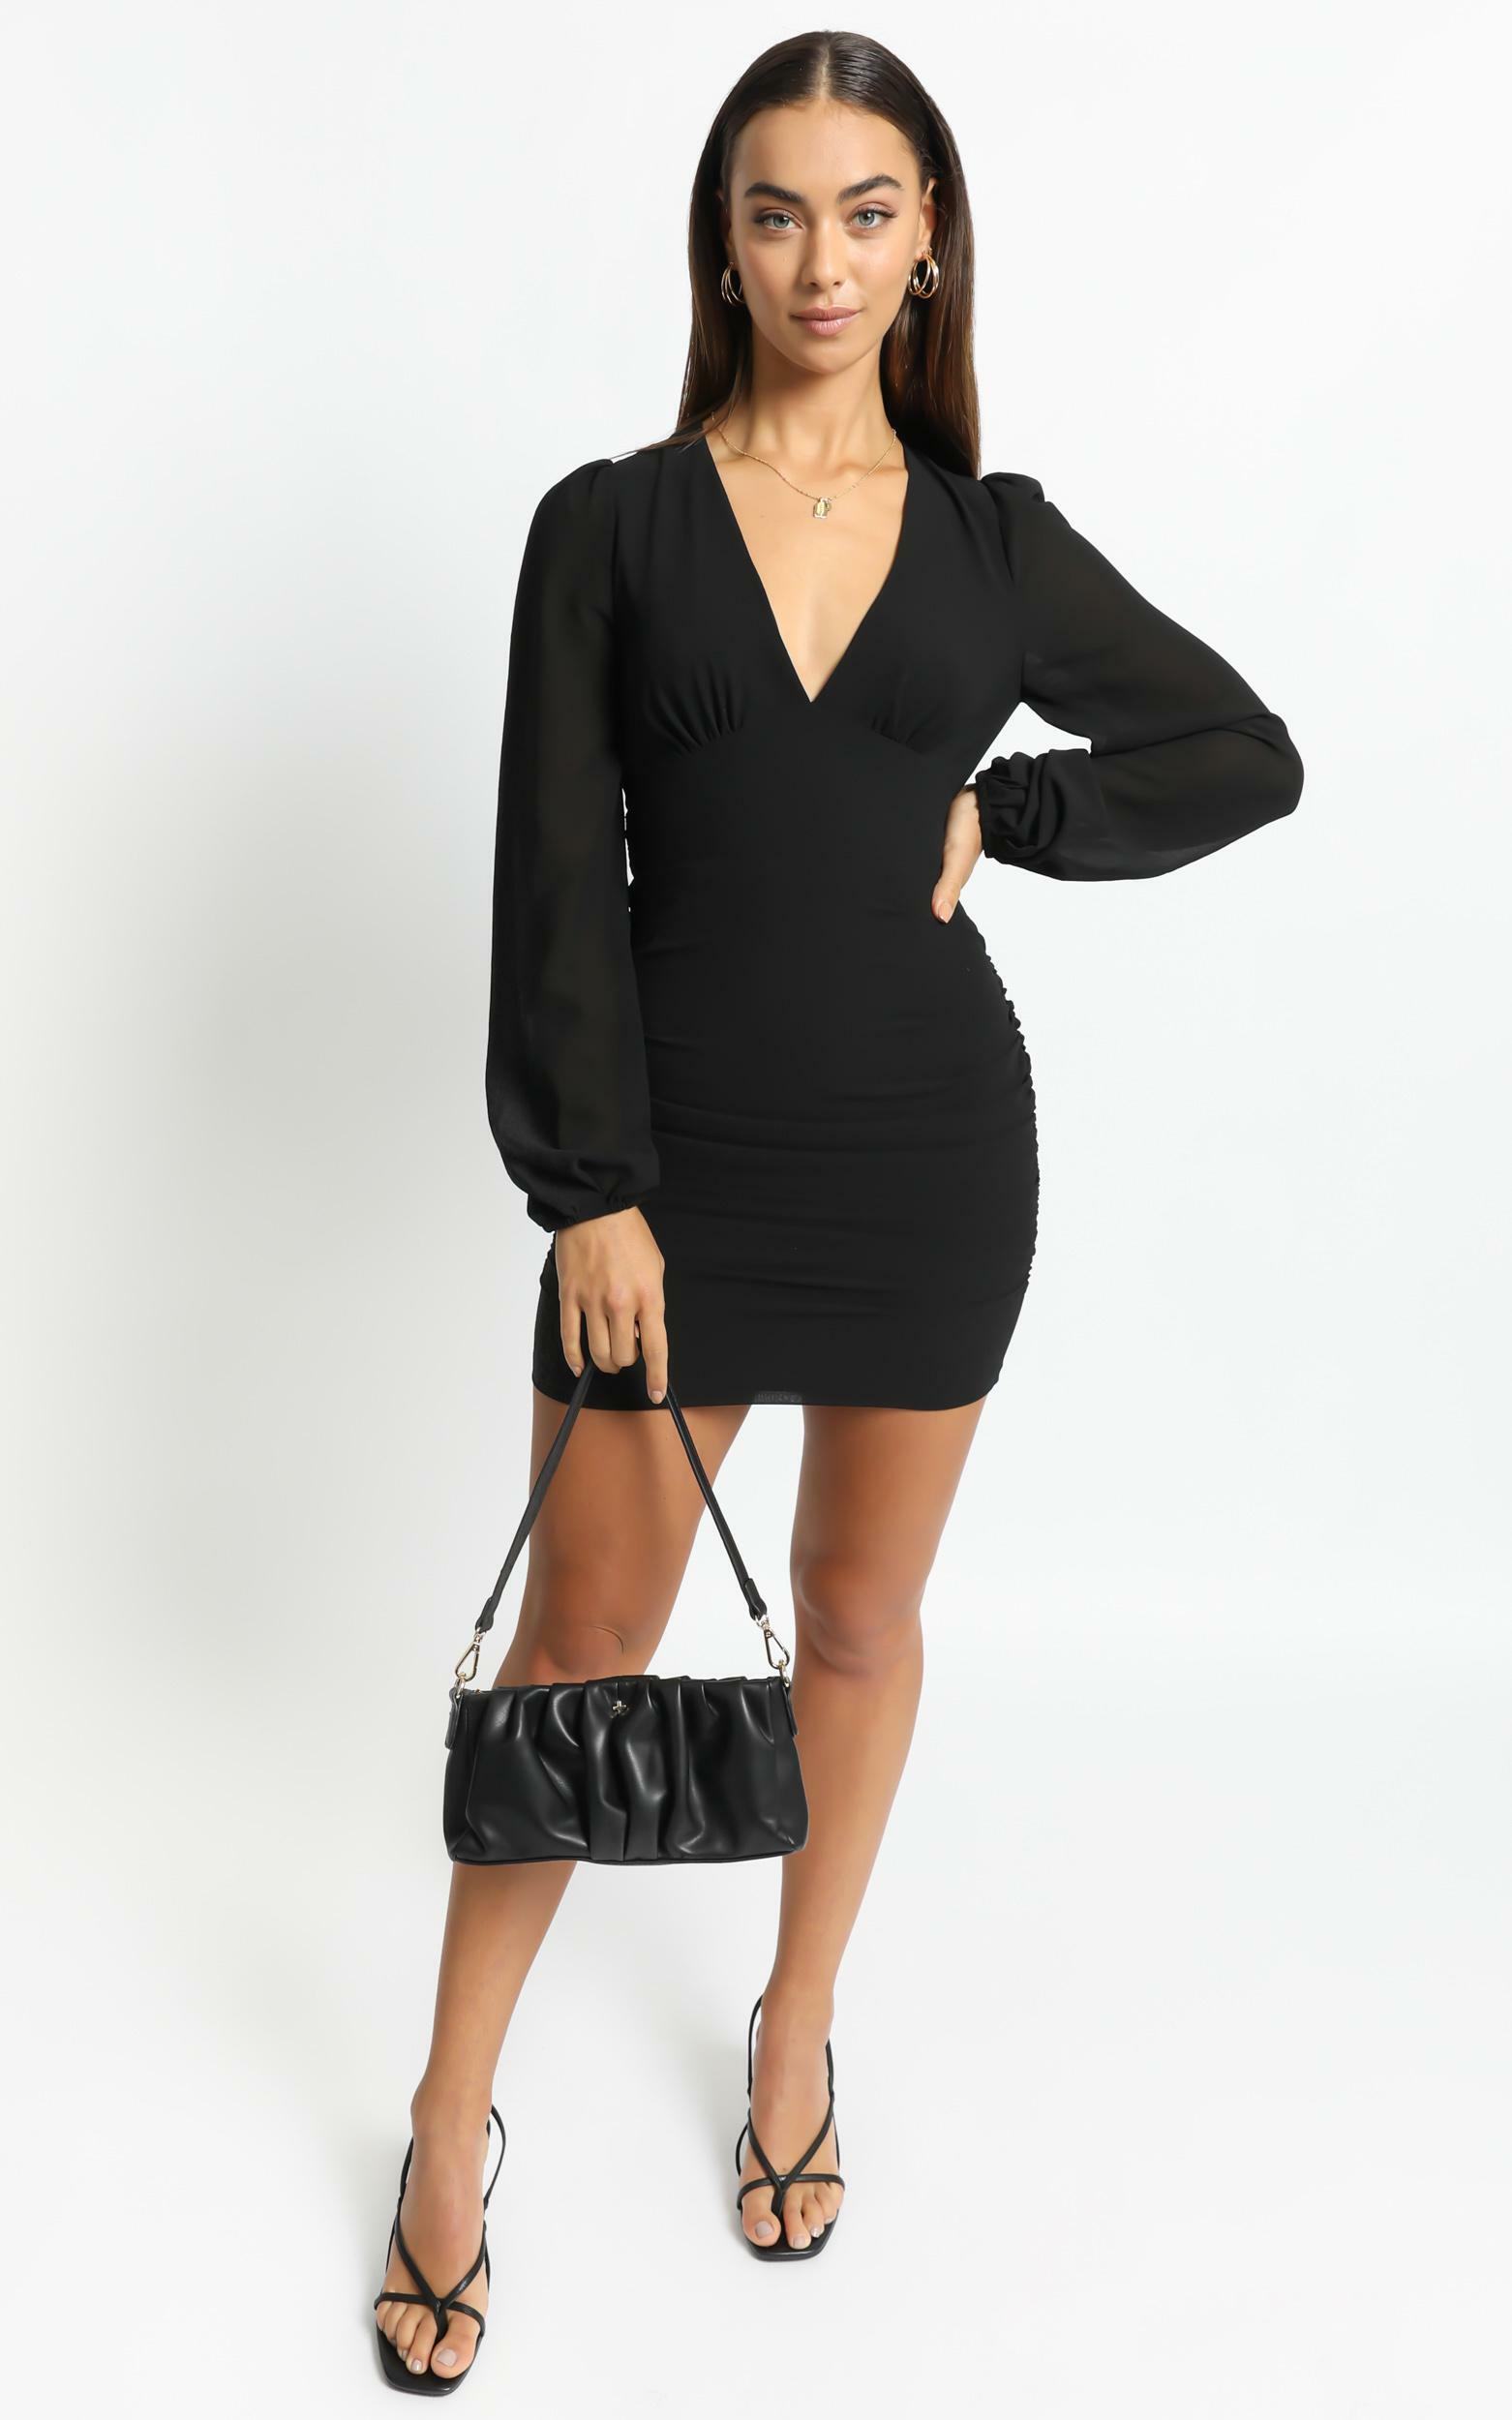 Party Just For Fun Dress in Black - 06, BLK1, hi-res image number null